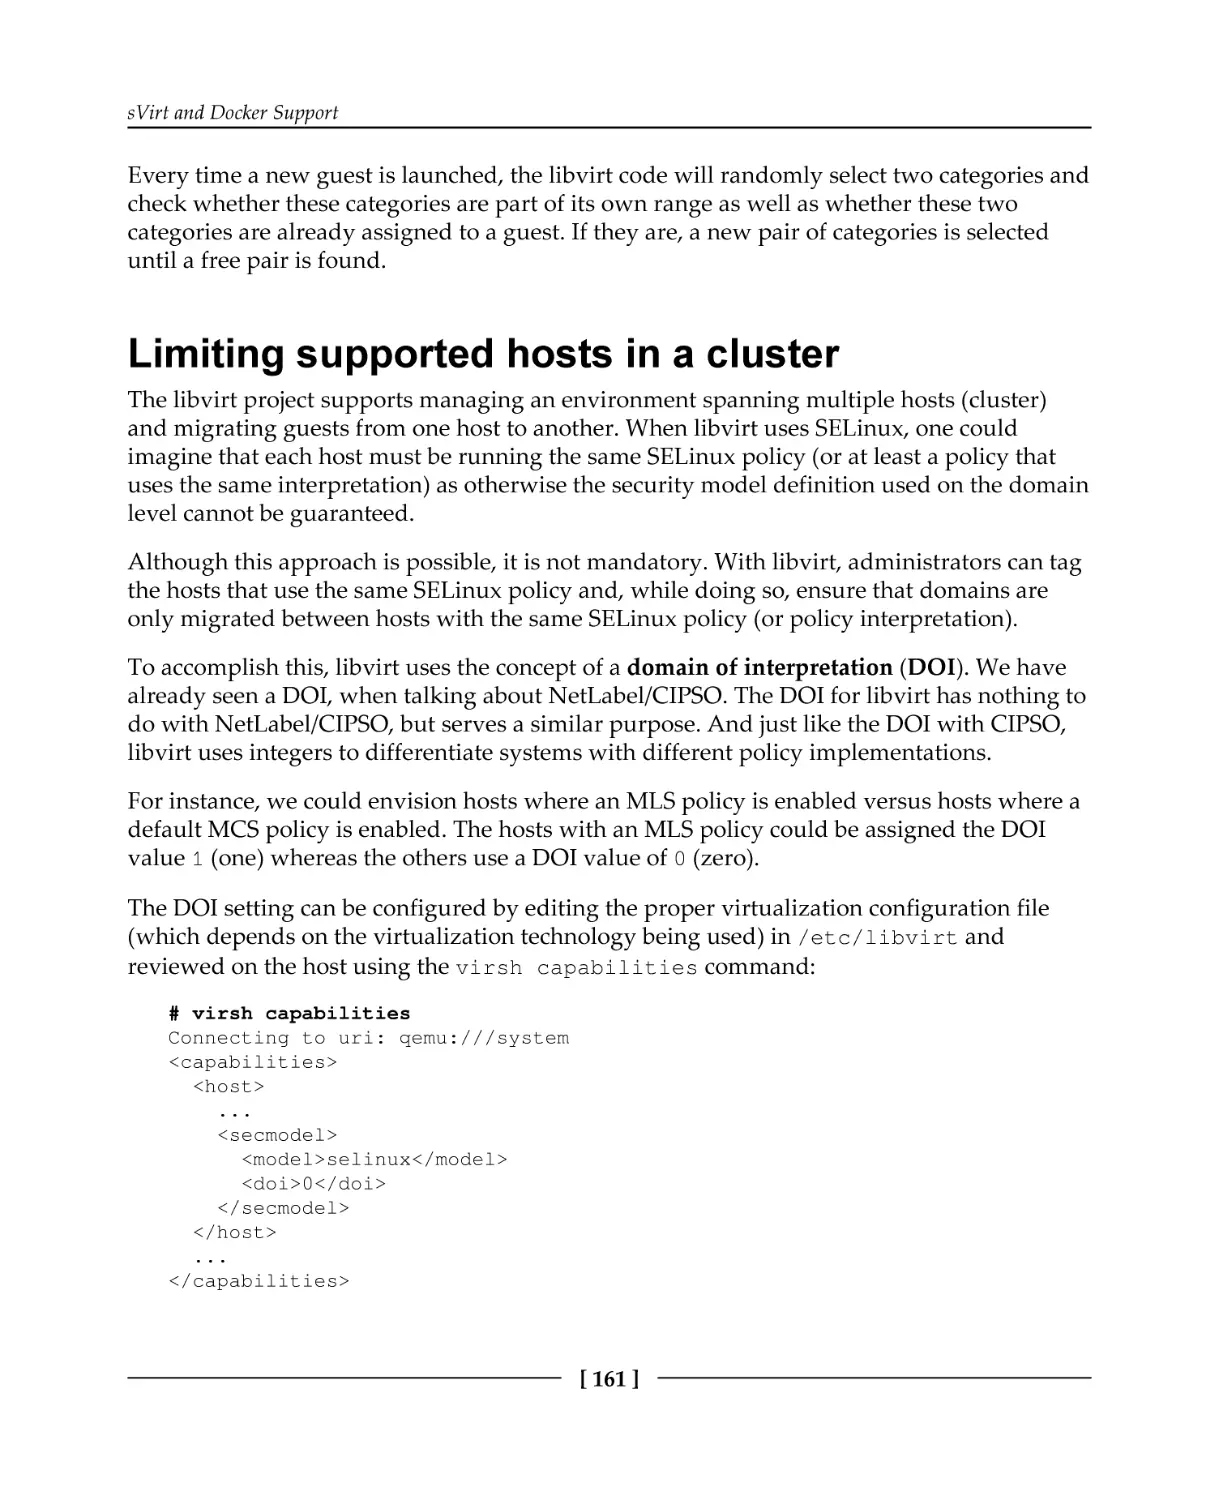 Limiting supported hosts in a cluster